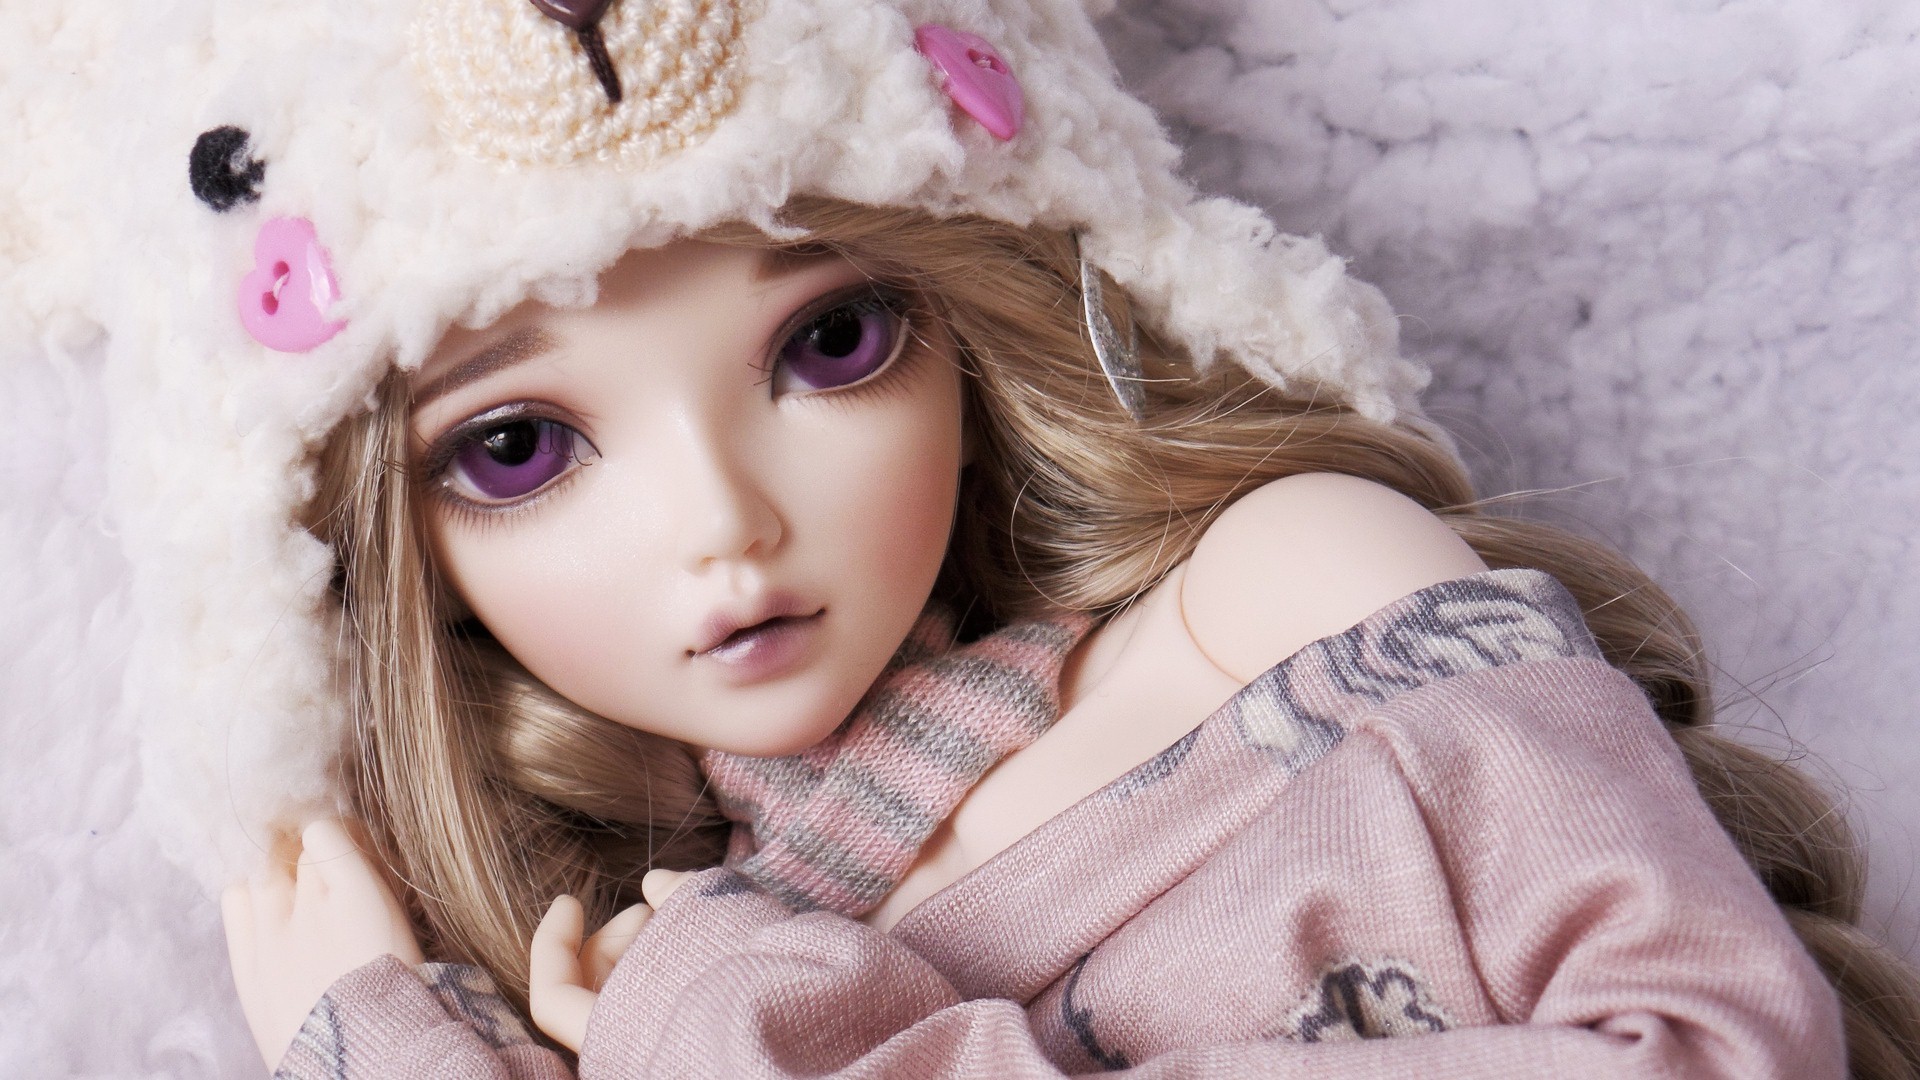 1920x1080 ... beautiful doll wallpapers for little s my free wallpapers hub; cute  barbie ...